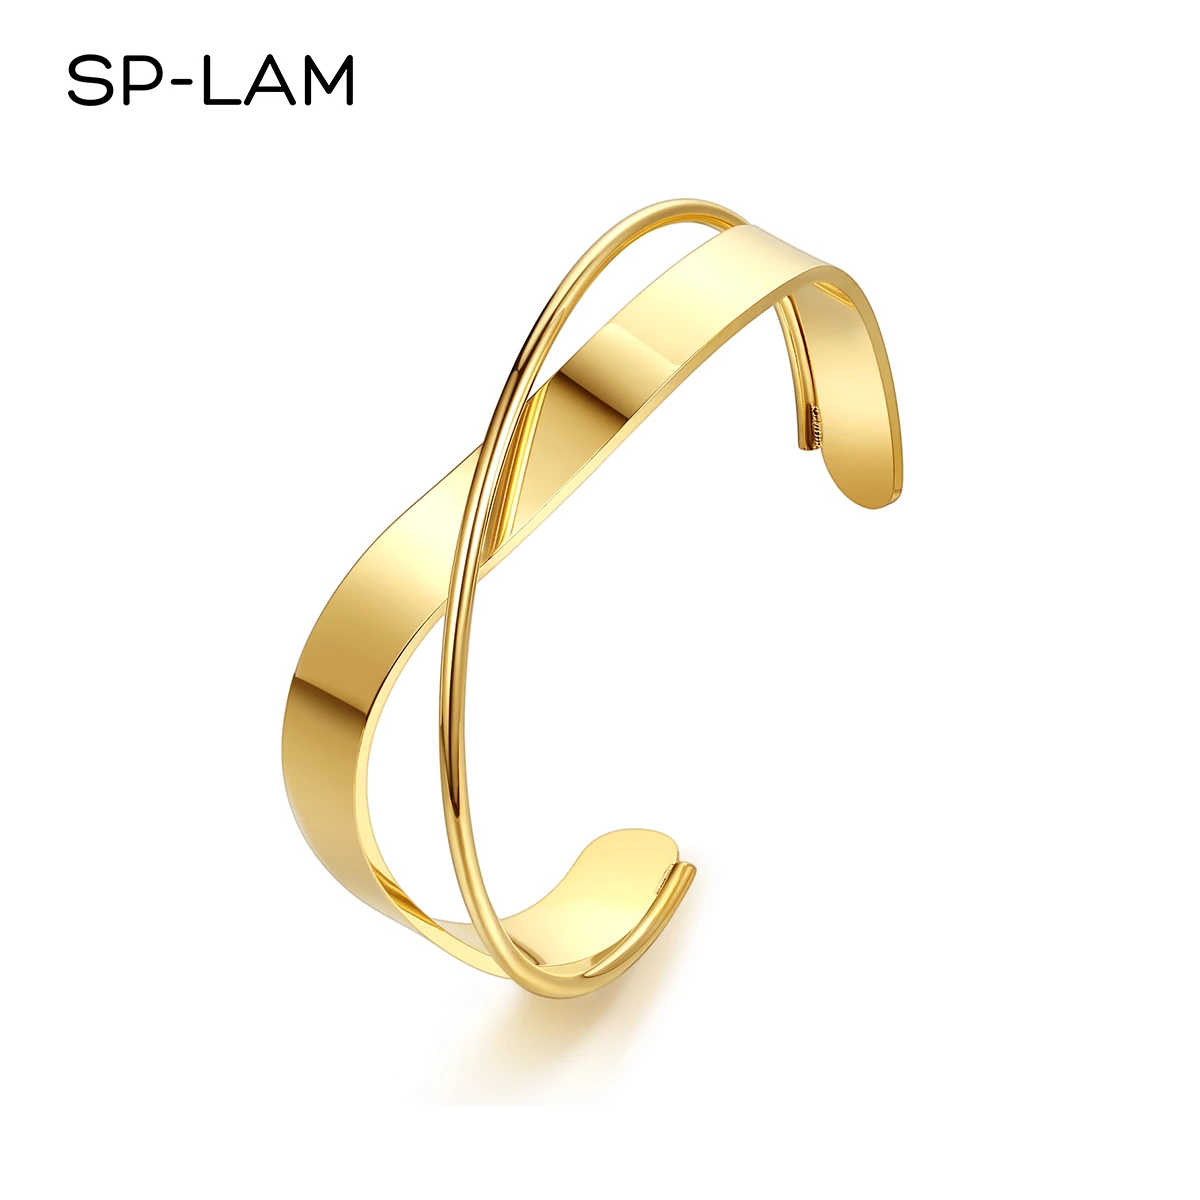 

SP-LAM Gold Plated Wide Cuff Bracelet Female Fashion Designer Stainless Steel Bangle Jewelry Woman